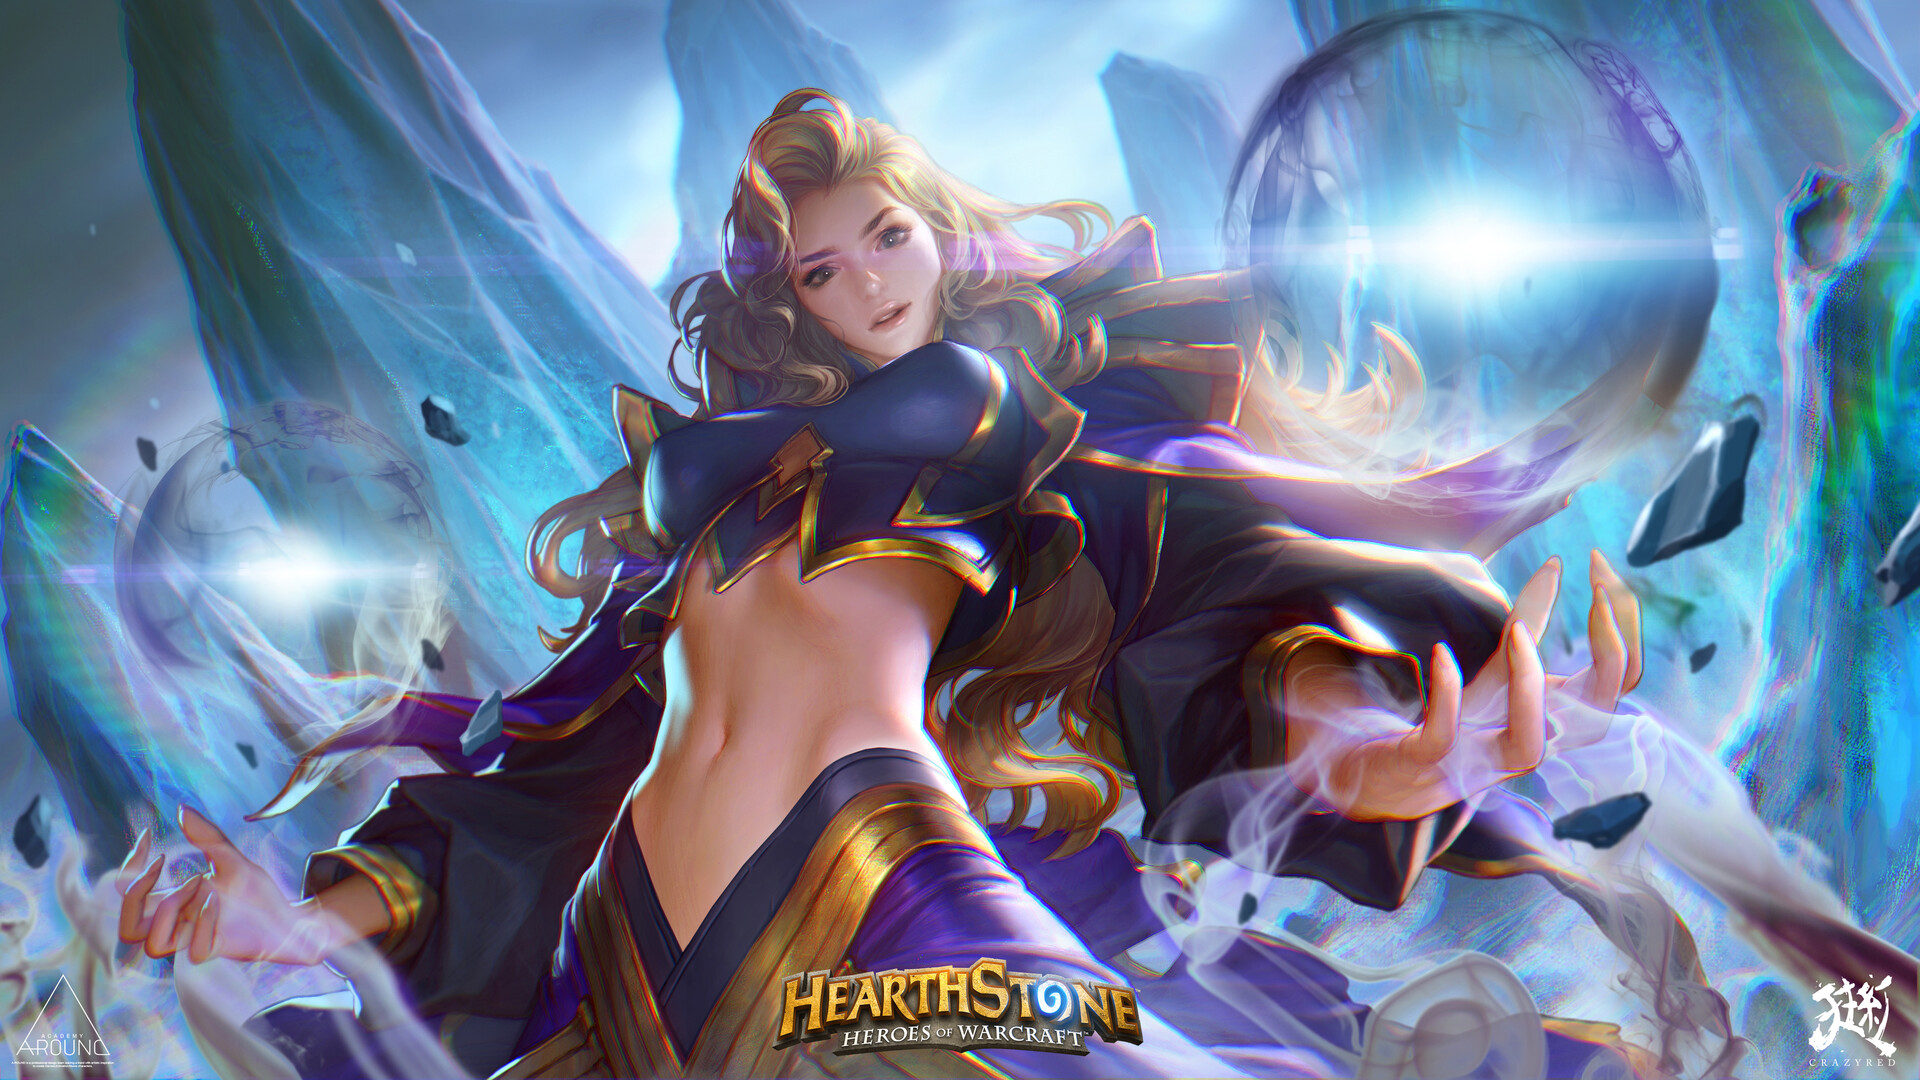 General 1920x1080 Shim Jae-Woo drawing Hearthstone women Jaina Proudmoore tight clothing magician spell low-angle blonde bra belly